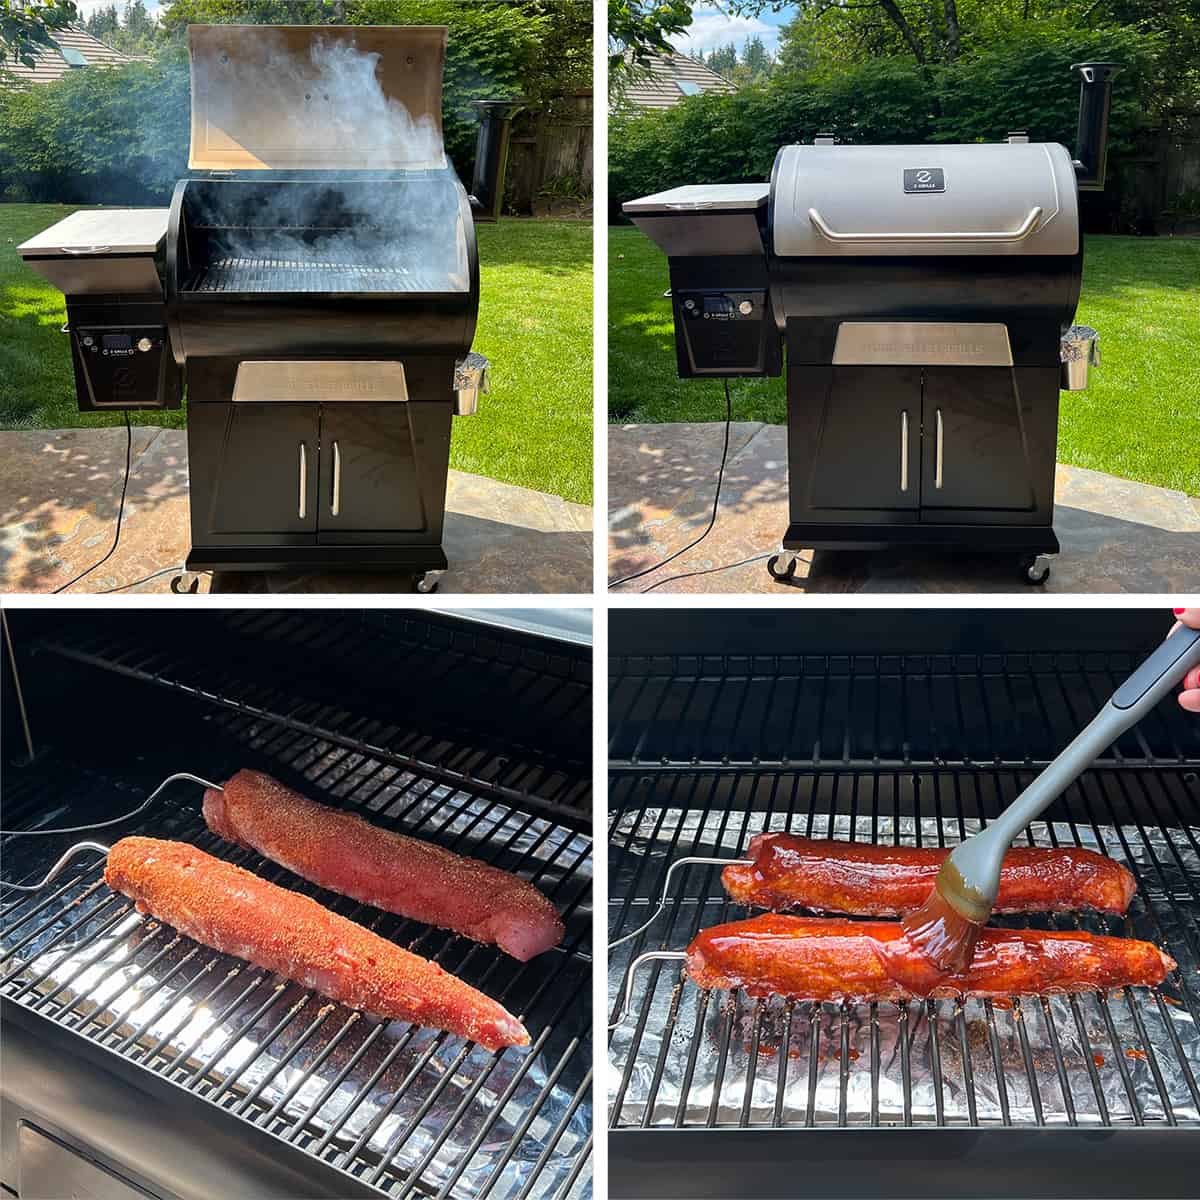 A Z Grills Pellet Grill and Smoker with smoke coming out of it and pork tenderloin on the grill being basted with BBQ sauce.